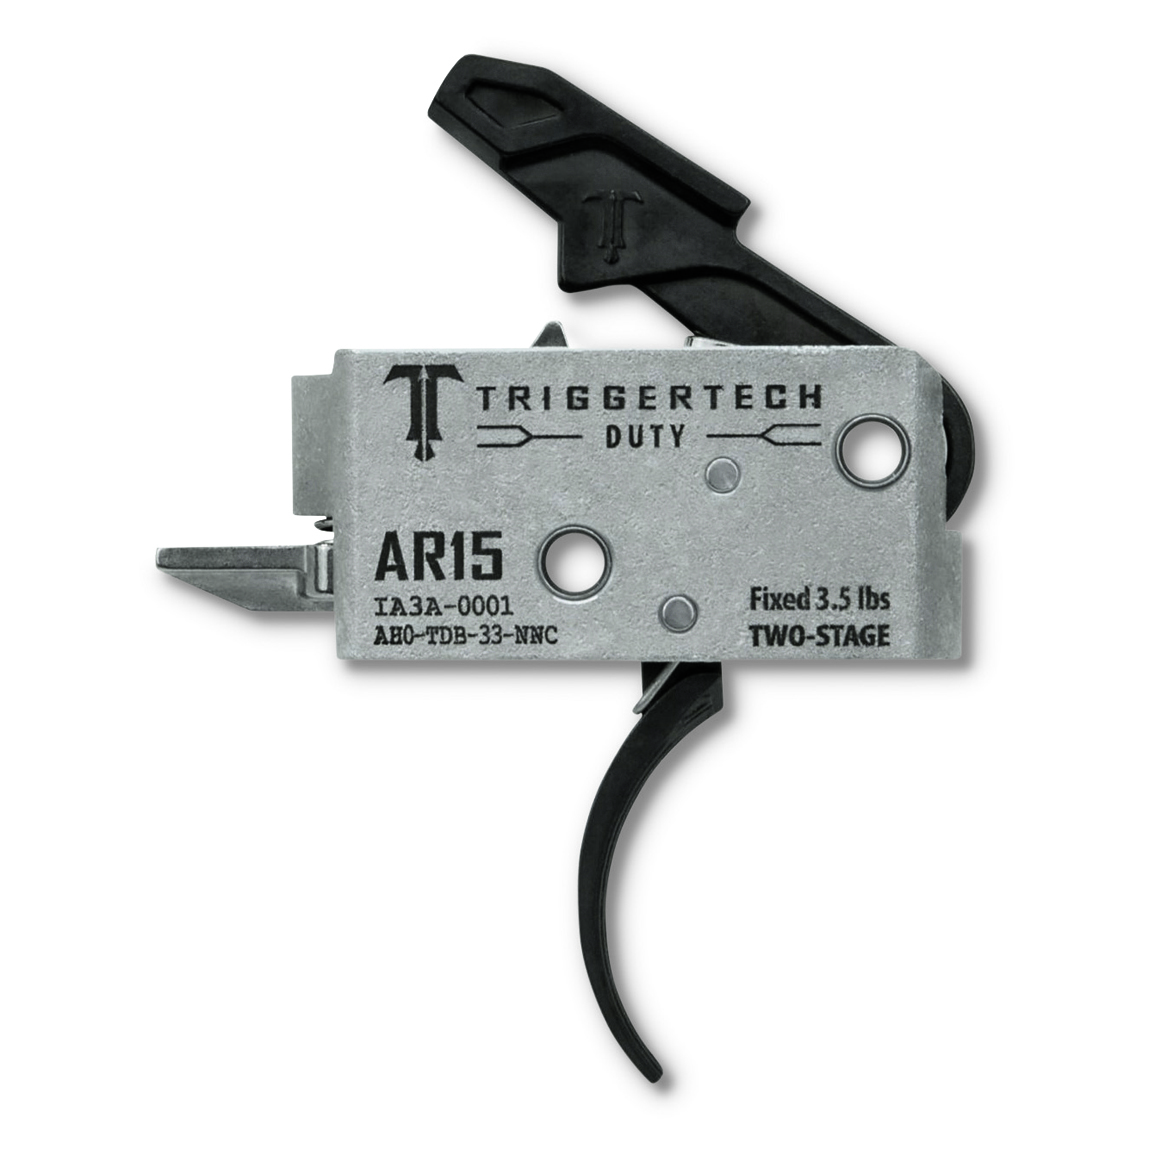 TriggerTech AR-15 Duty Line Curved 2-Stage Trigger, 3.5-lb.